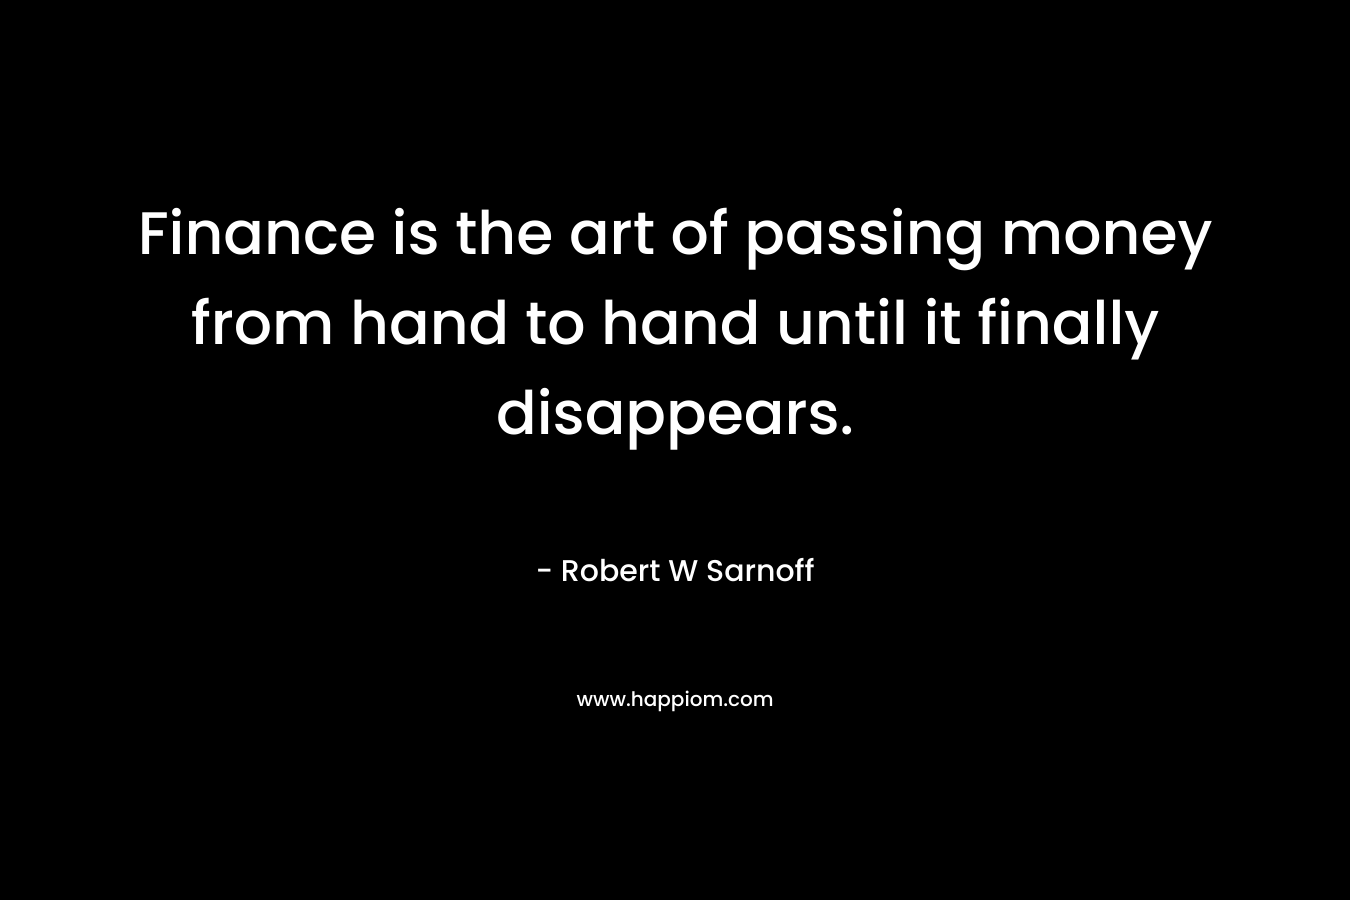 Finance is the art of passing money from hand to hand until it finally disappears.